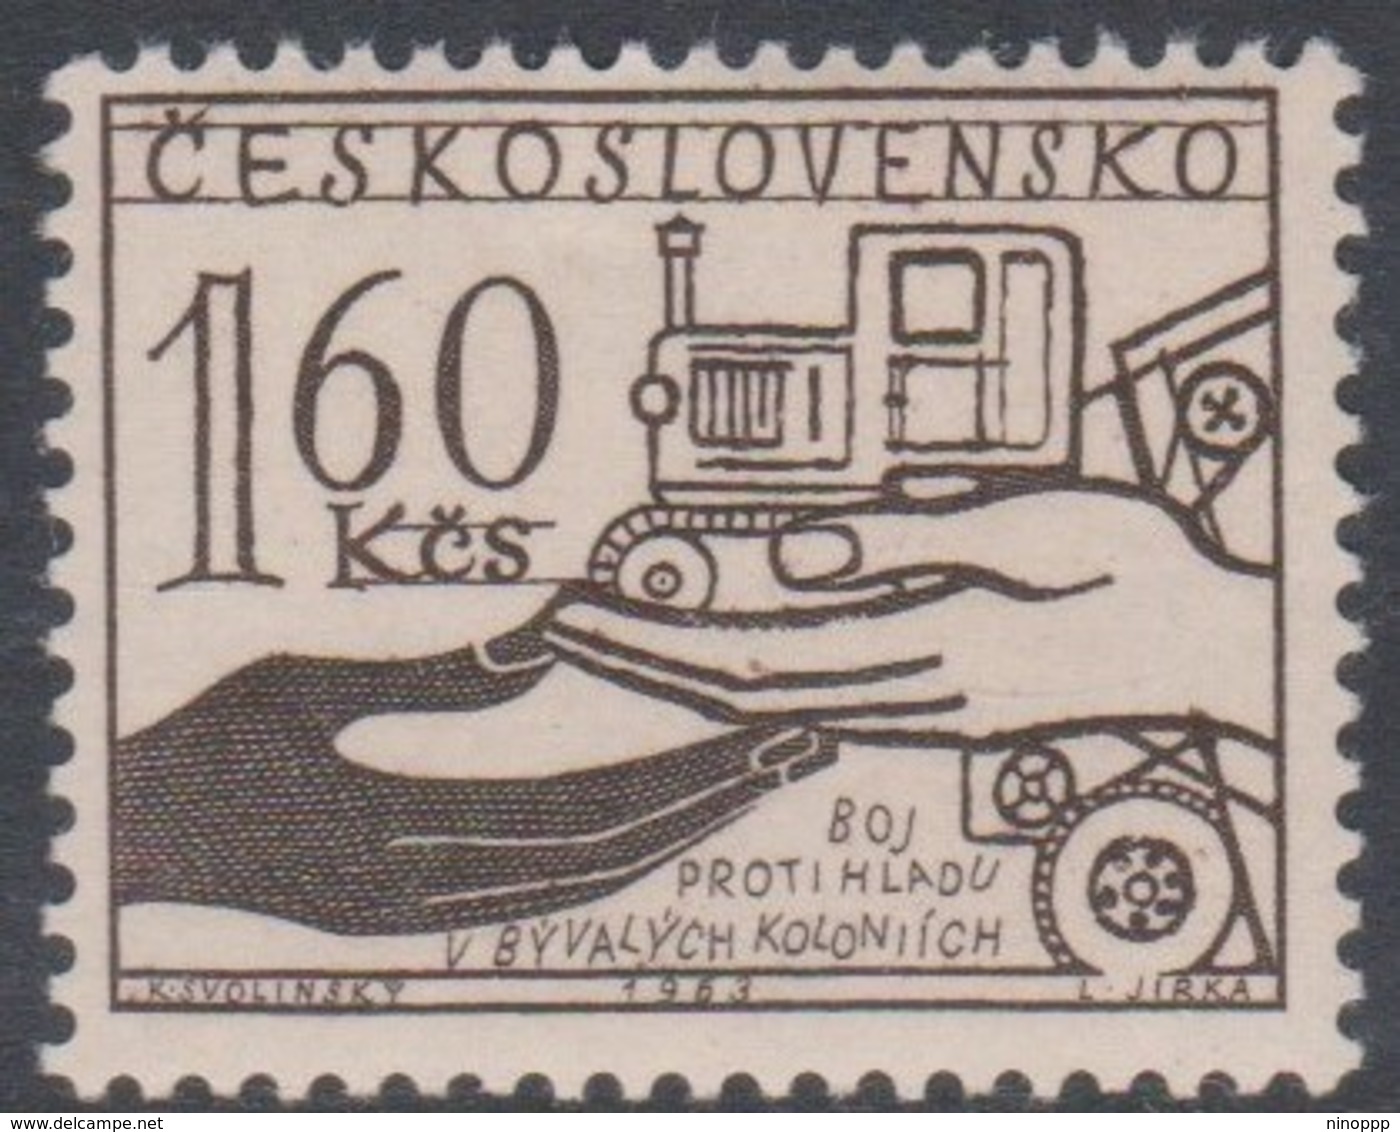 Czechoslovakia Scott 1195 1963 FAO Freedom From Hunger, Mint Never Hinged - Unused Stamps